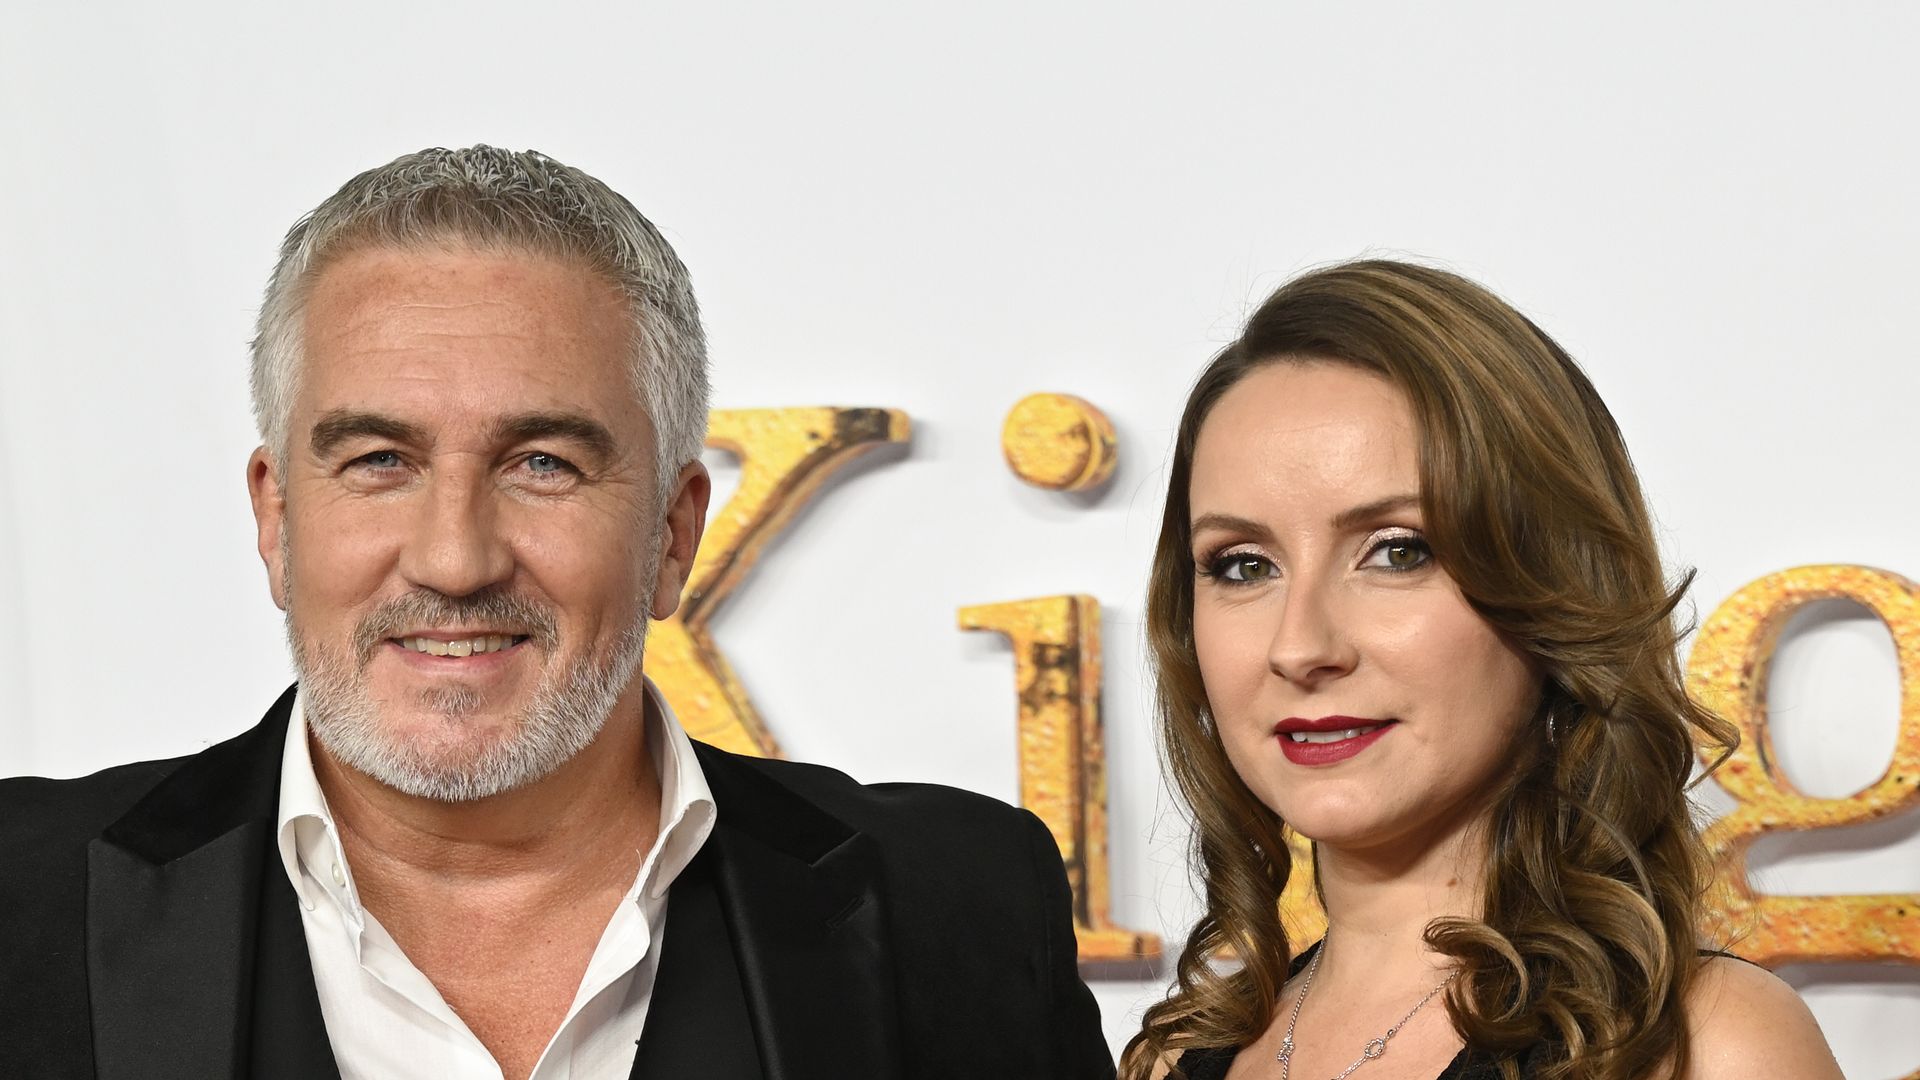 Paul Hollywood and Melissa Spalding looking dapper at a premiere